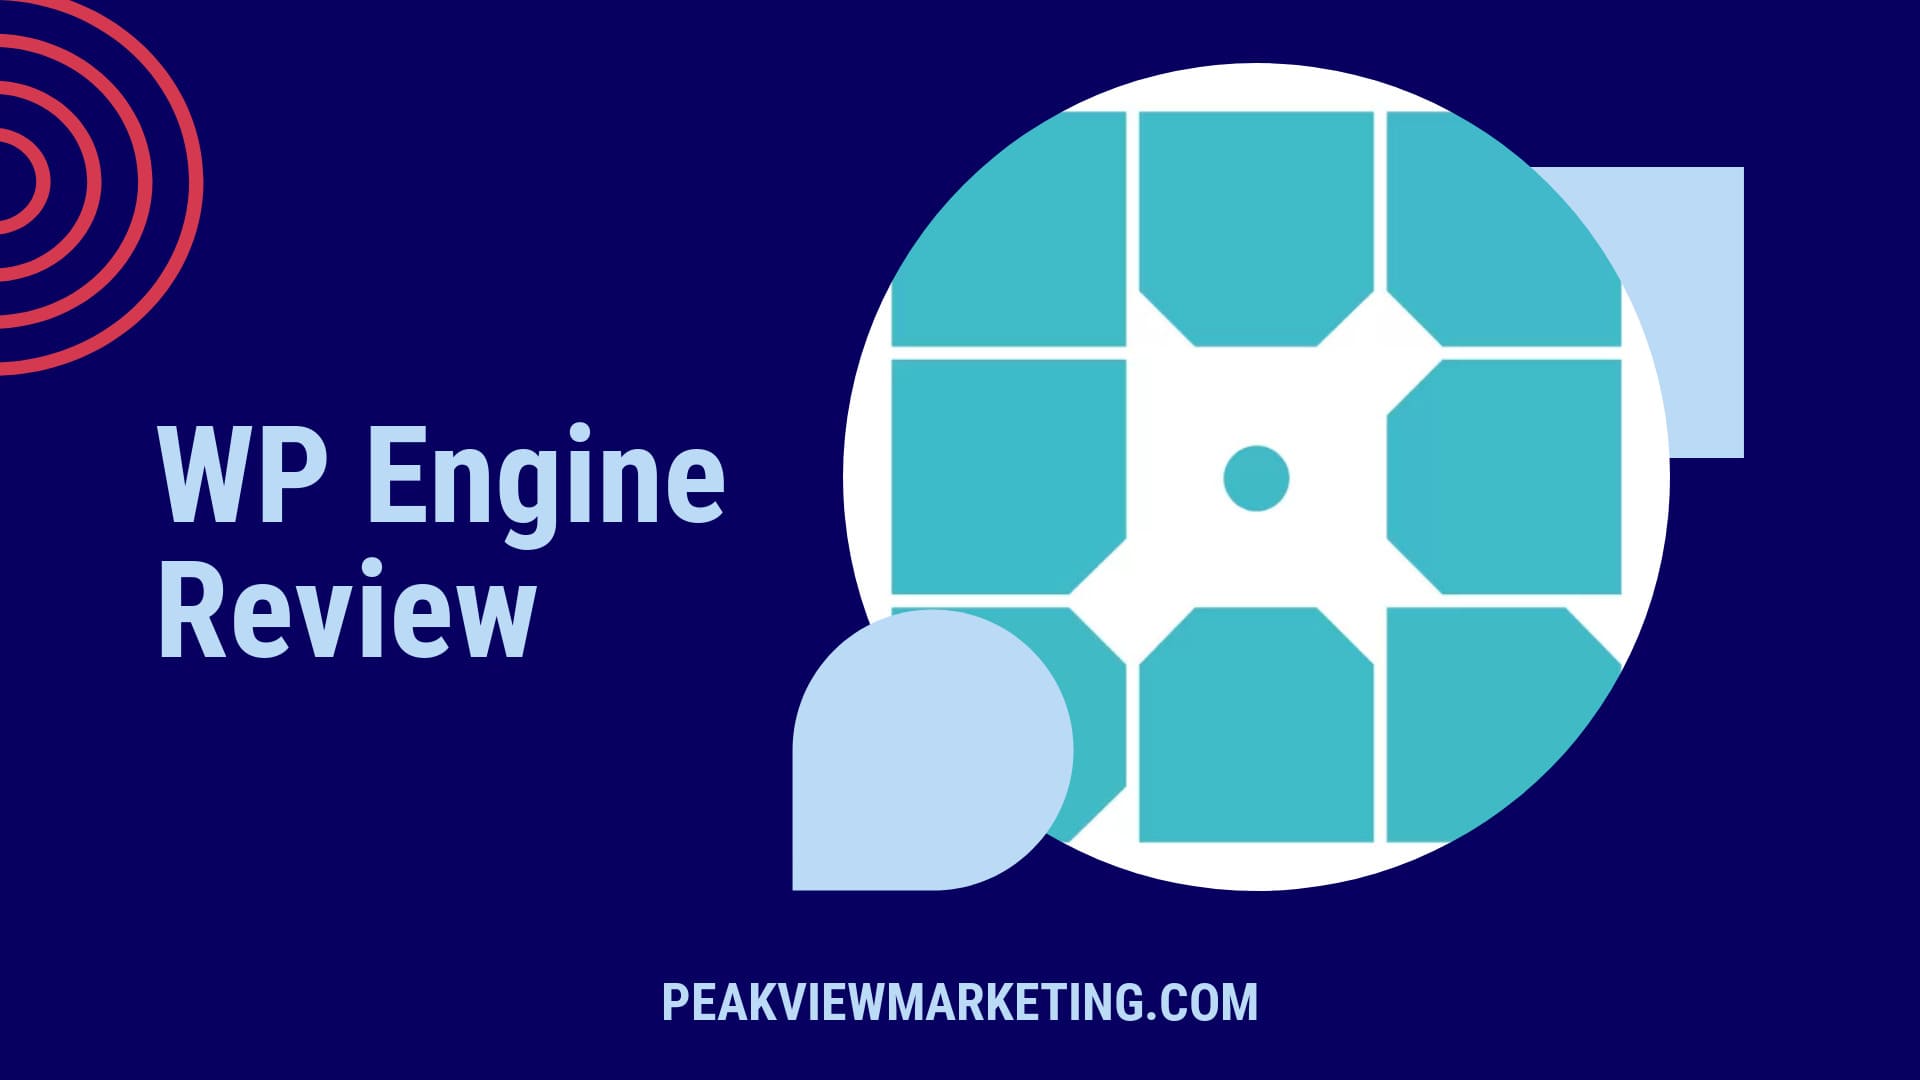 WP Engine Review Image